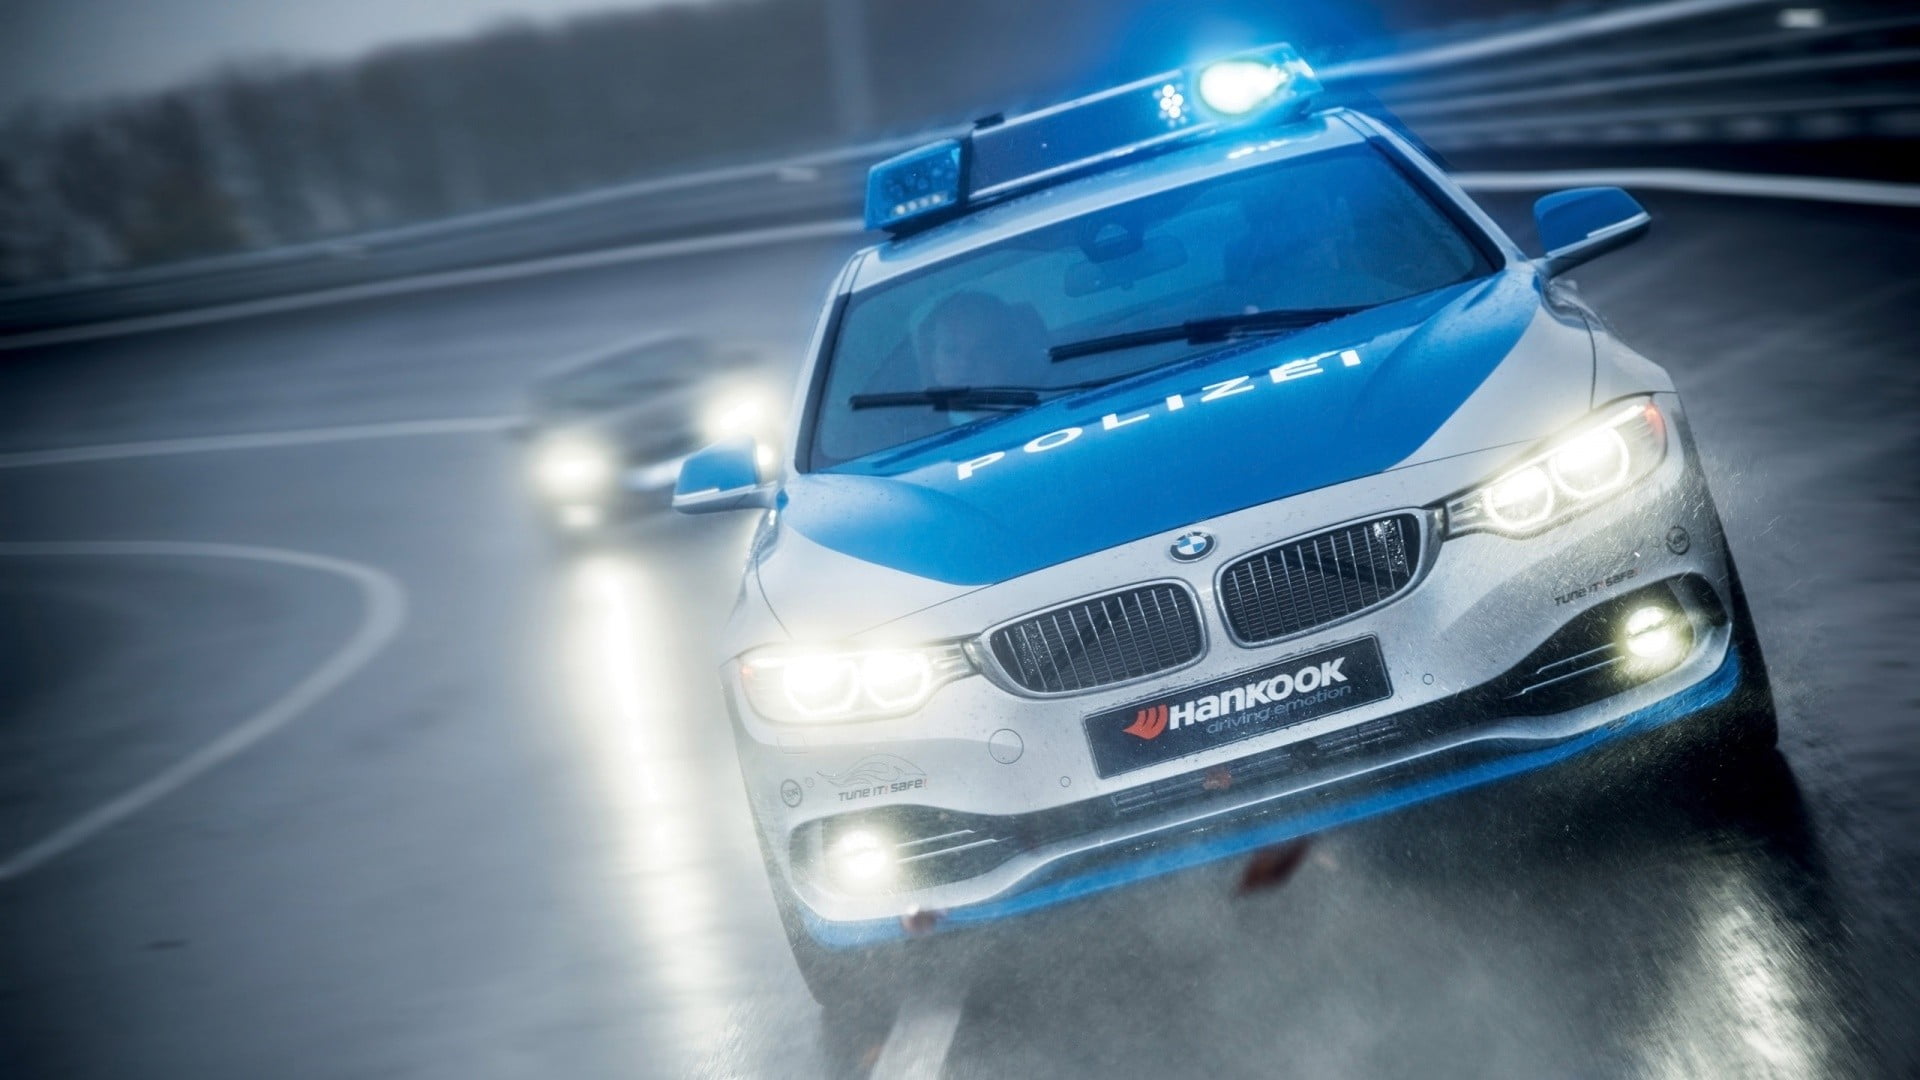 blue and gray BMW police car, car, police, BMW, vehicle